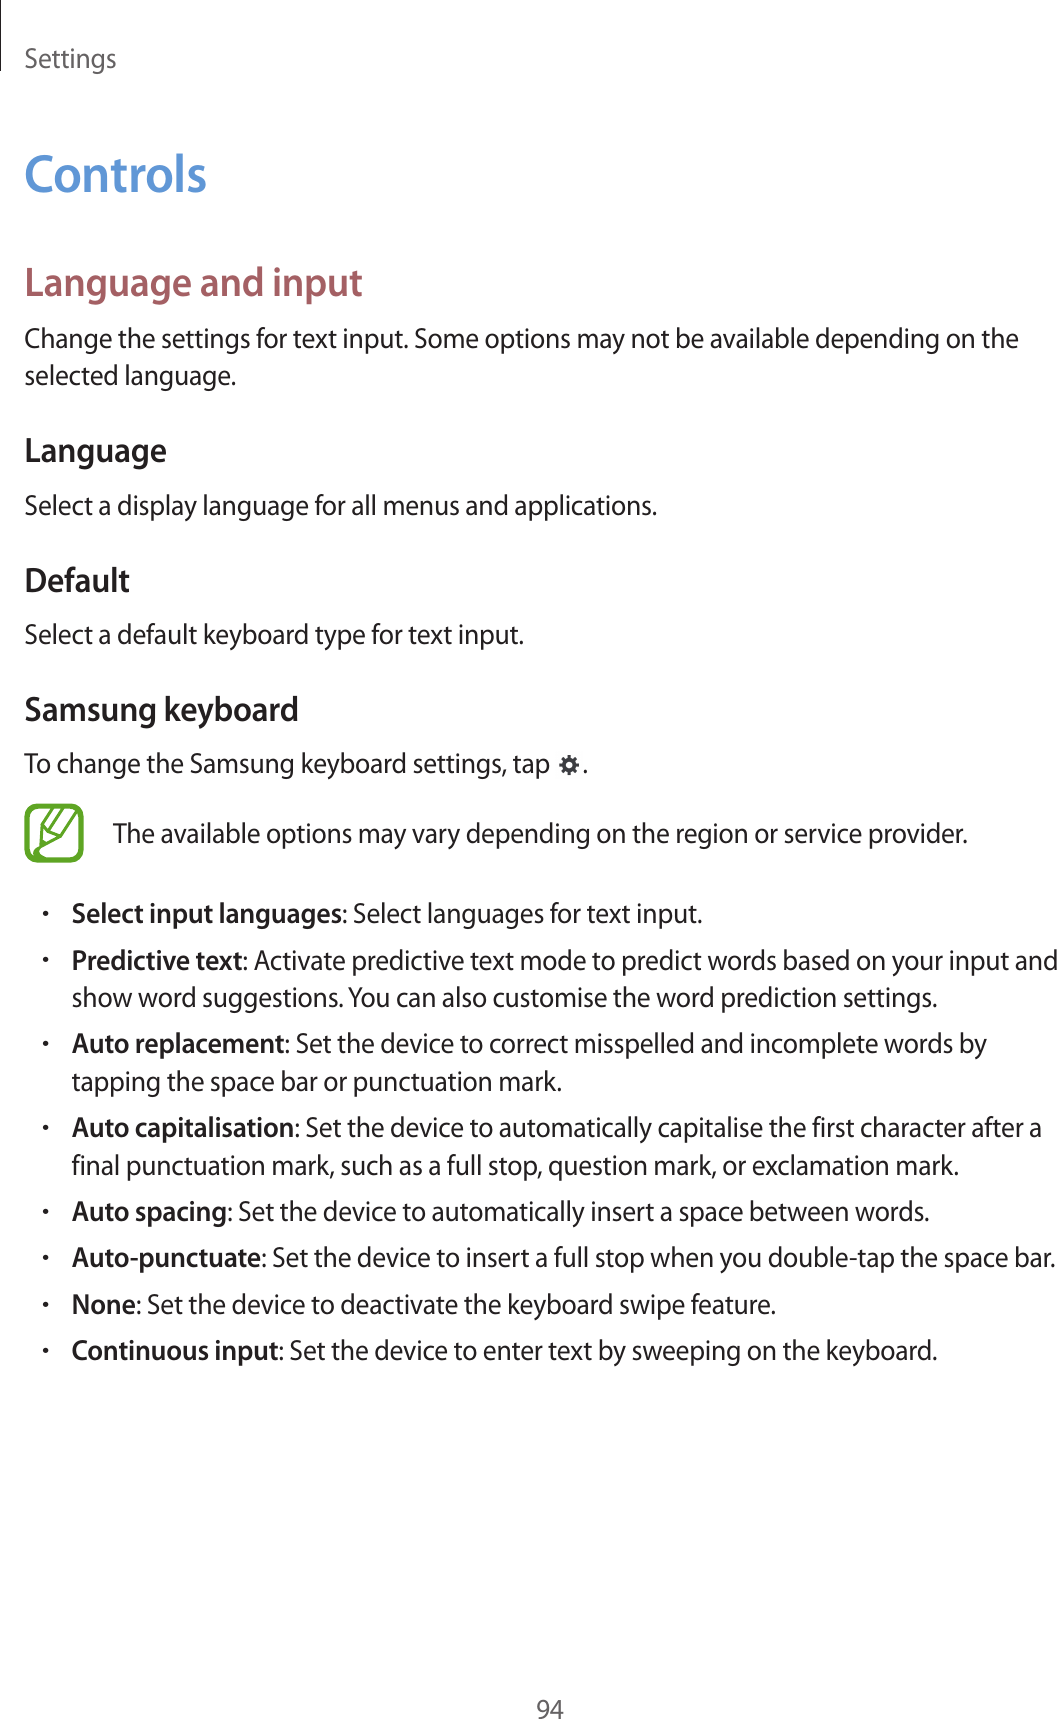 Settings94ControlsLanguage and inputChange the settings for text input. Some options may not be available depending on the selected language.LanguageSelect a display language for all menus and applications.DefaultSelect a default keyboard type for text input.Samsung keyboardTo change the Samsung keyboard settings, tap  .The available options may vary depending on the region or service provider.•Select input languages: Select languages for text input.•Predictive text: Activate predictive text mode to predict words based on your input and show word suggestions. You can also customise the word prediction settings.•Auto replacement: Set the device to correct misspelled and incomplete words by tapping the space bar or punctuation mark.•Auto capitalisation: Set the device to automatically capitalise the first character after a final punctuation mark, such as a full stop, question mark, or exclamation mark.•Auto spacing: Set the device to automatically insert a space between words.•Auto-punctuate: Set the device to insert a full stop when you double-tap the space bar.•None: Set the device to deactivate the keyboard swipe feature.•Continuous input: Set the device to enter text by sweeping on the keyboard.